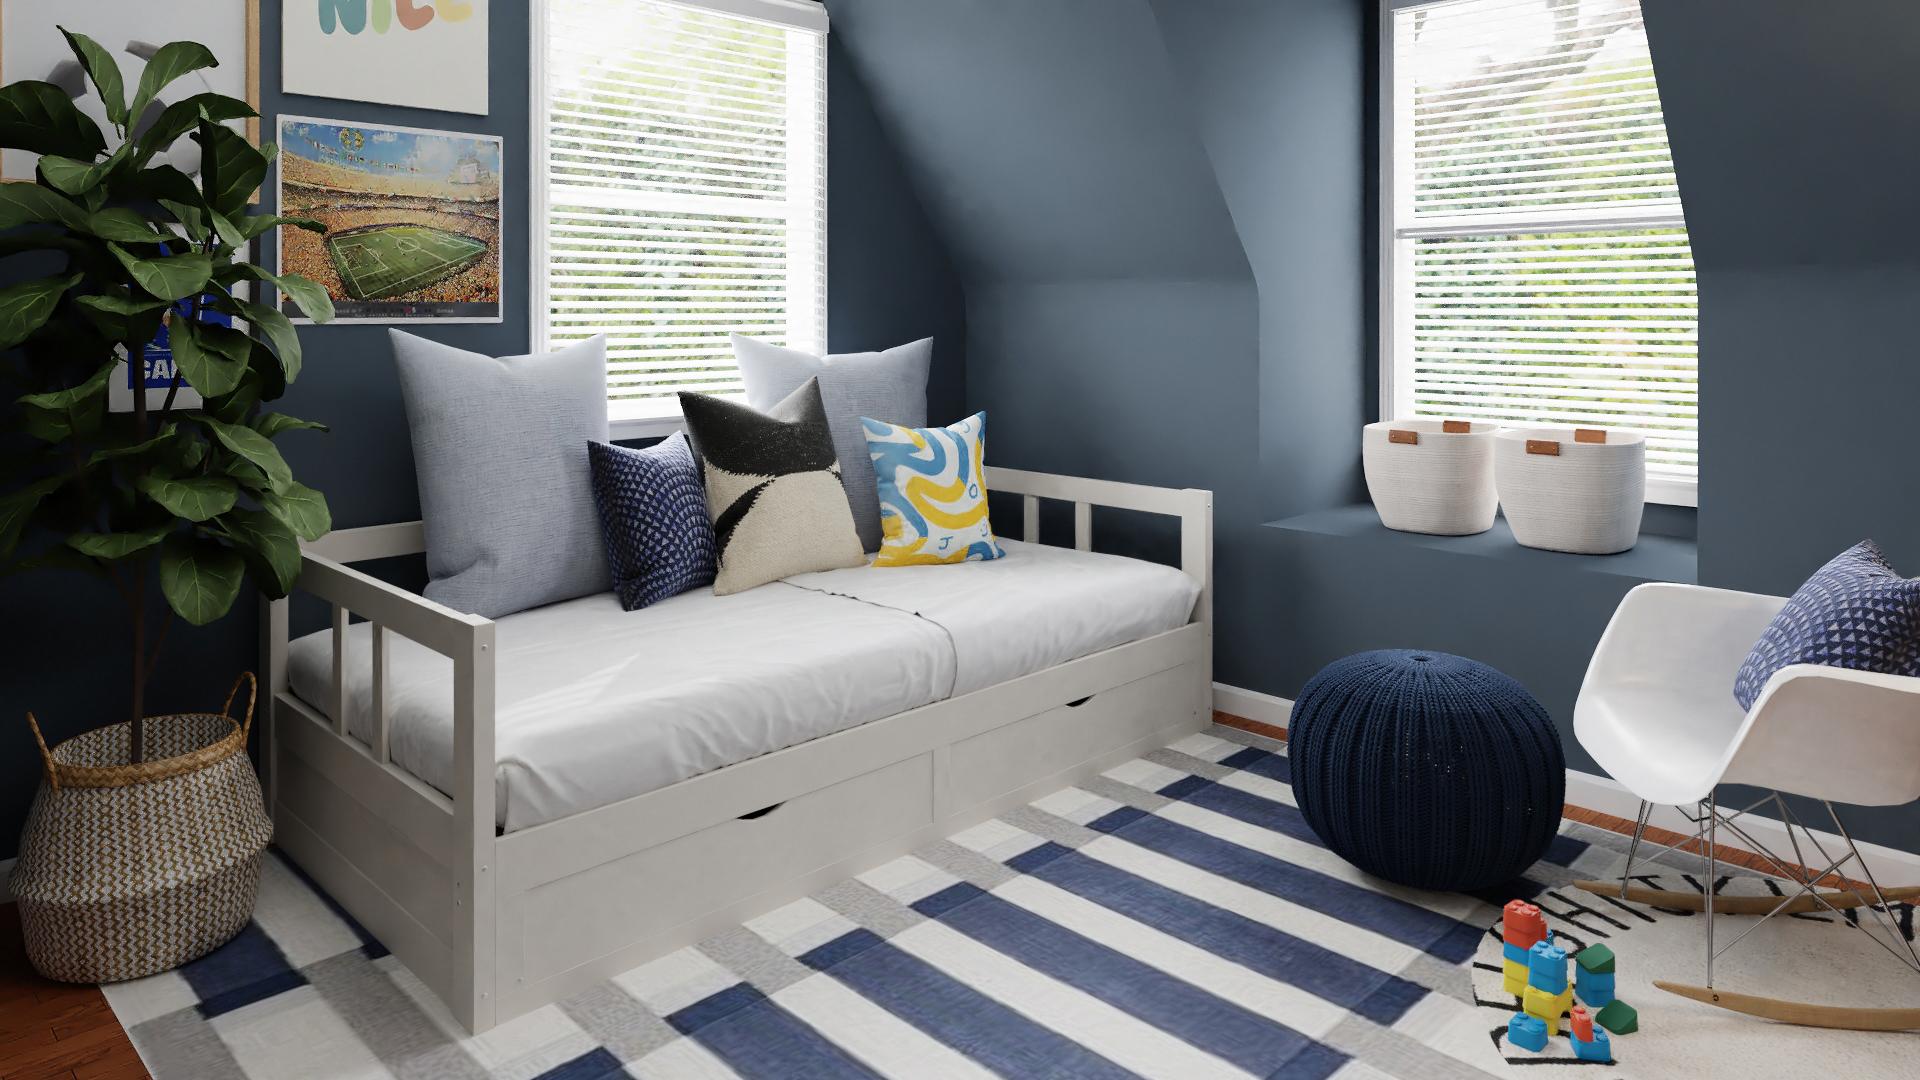 Pops Of Blue & Yellow: An Eclectic Bedroom For A Kid